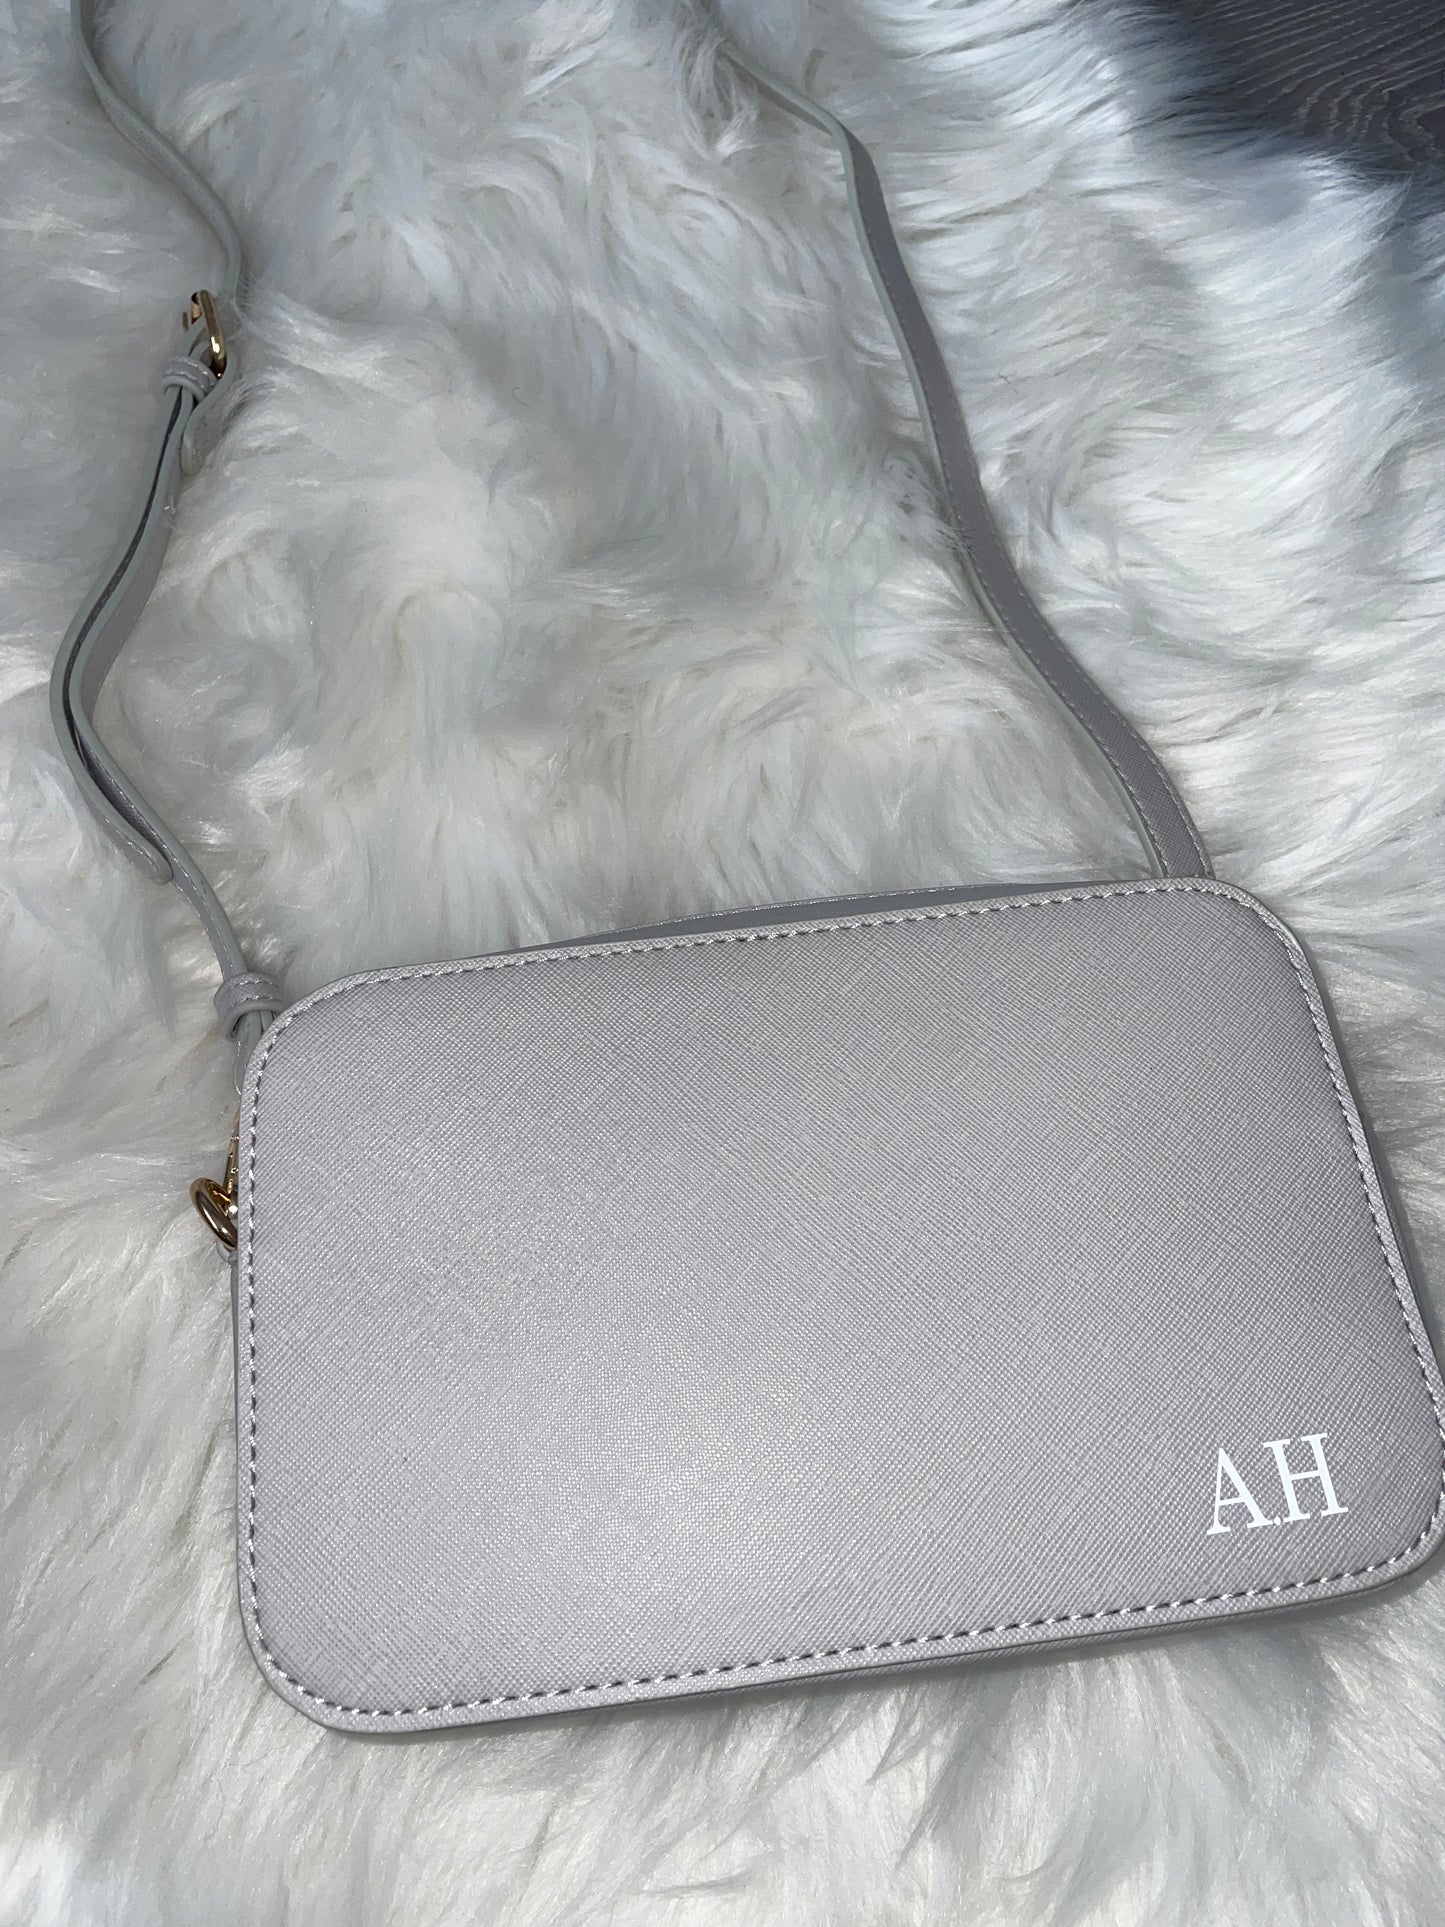 Personalised Initial / Name Cross Body Saffiano Fine Grain Leather Cross Body Bag - Add Additional Fabric Strap